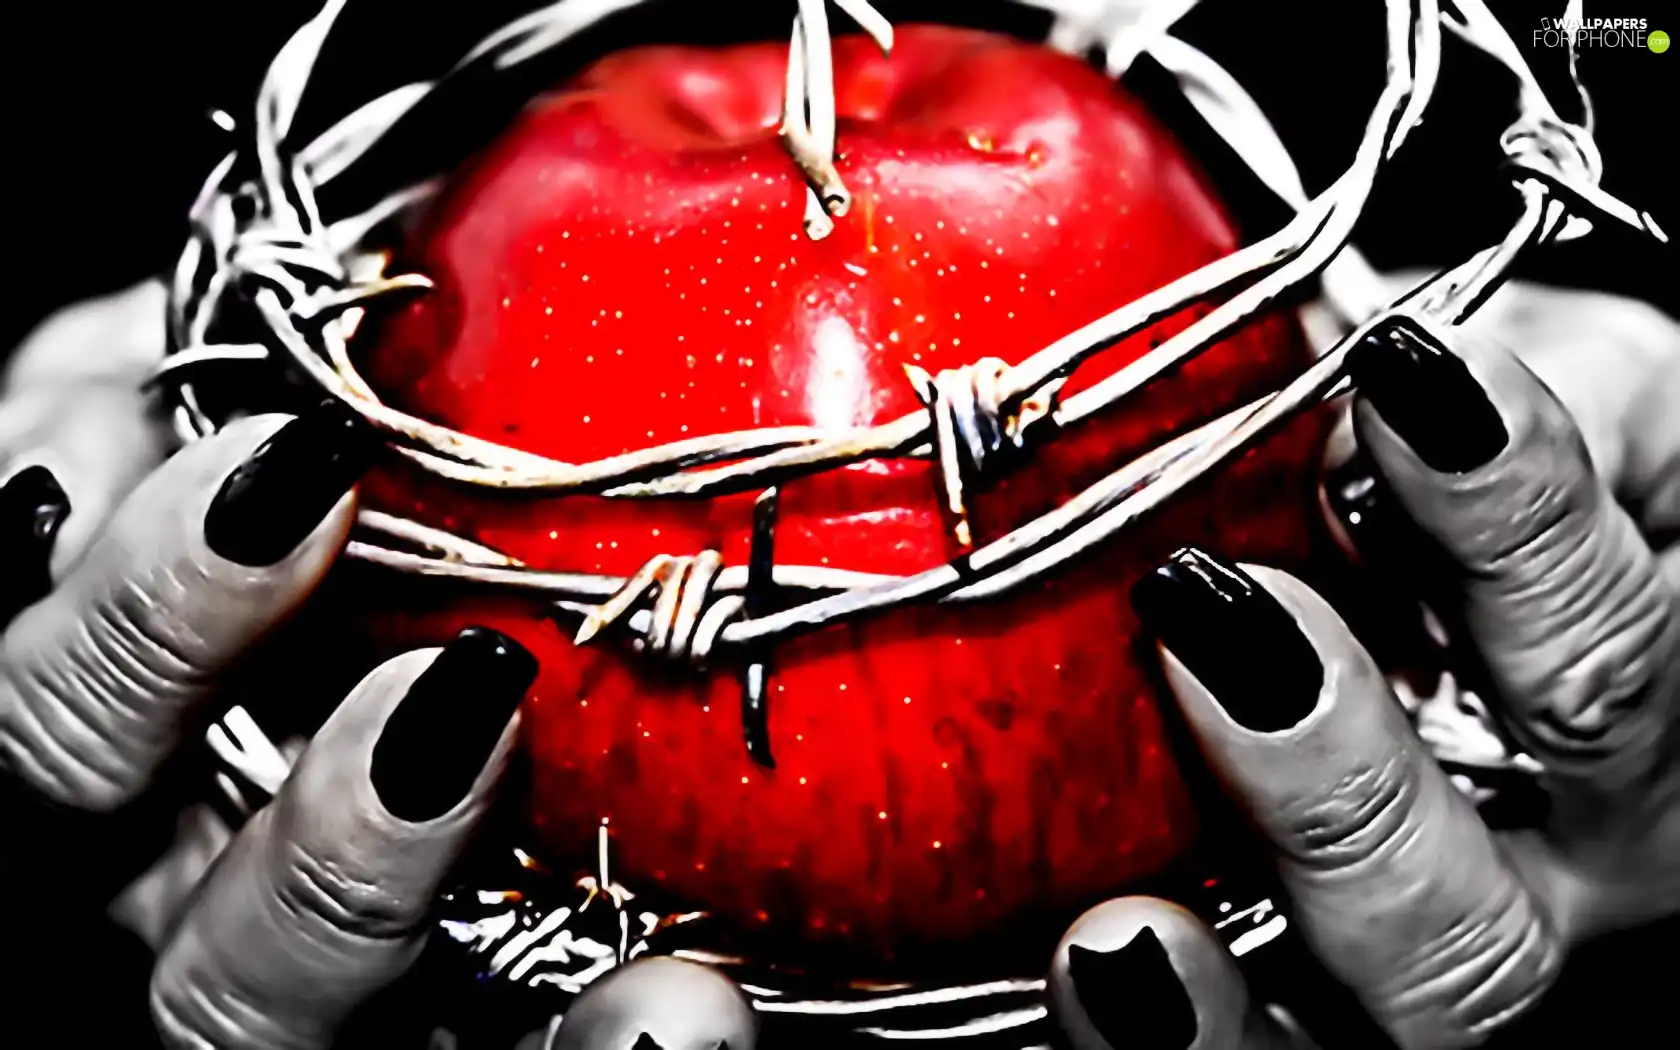 wire, prickly, Apple, hands, Red